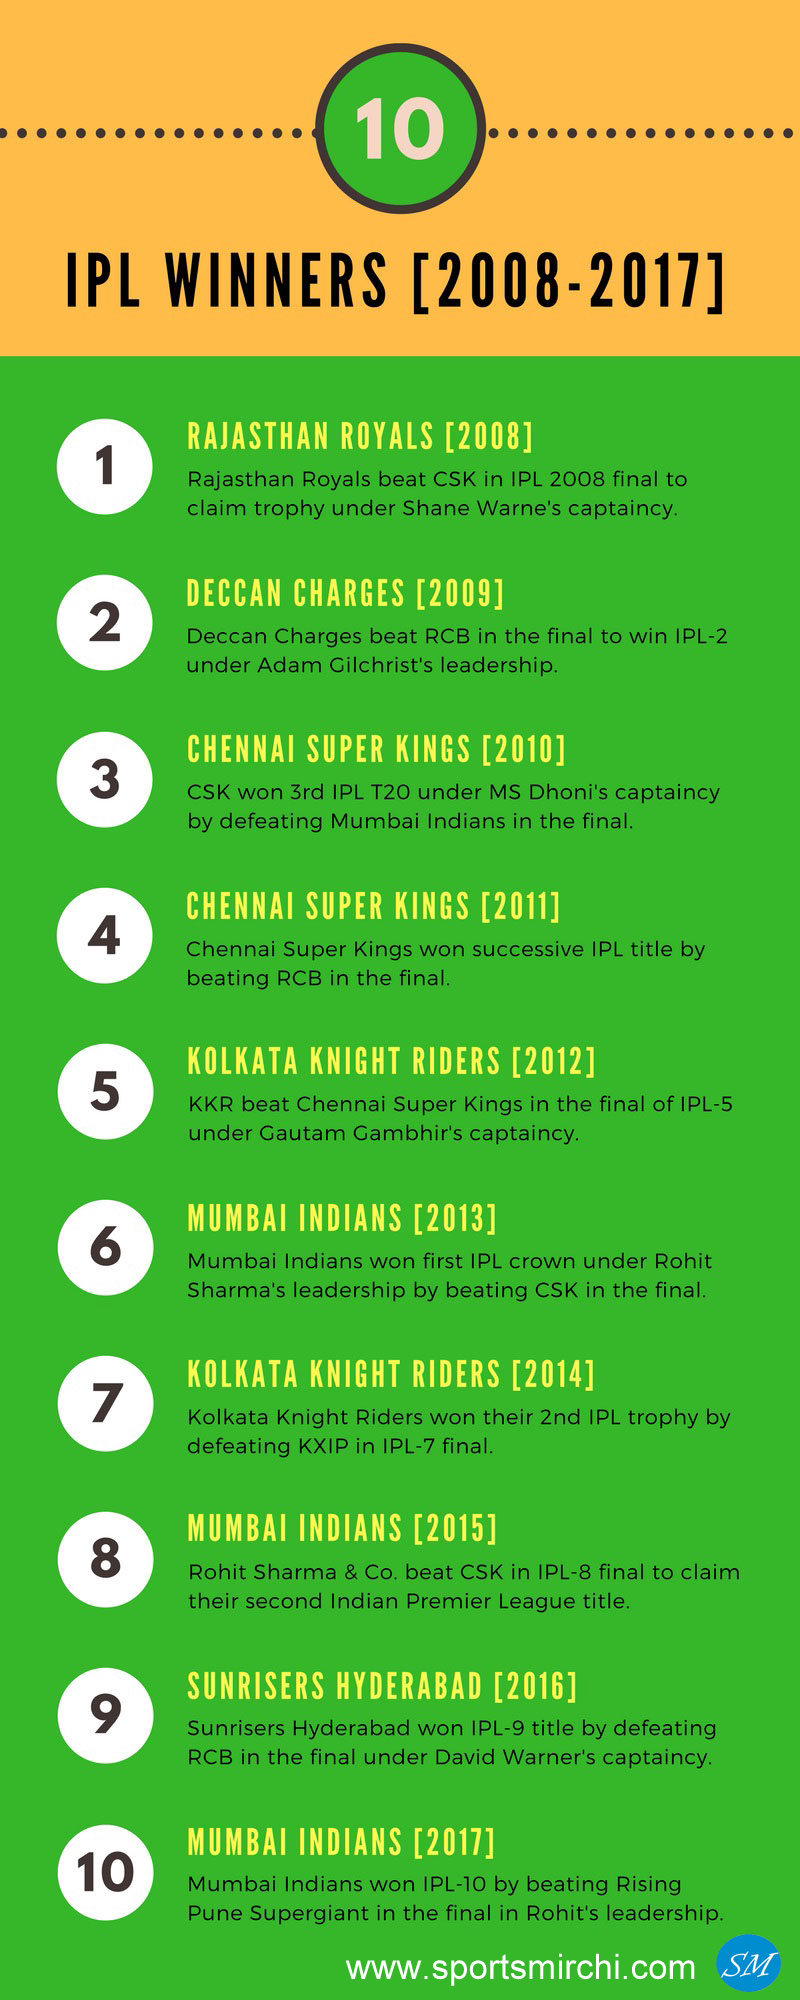 ipl winners from 2008 to 2017